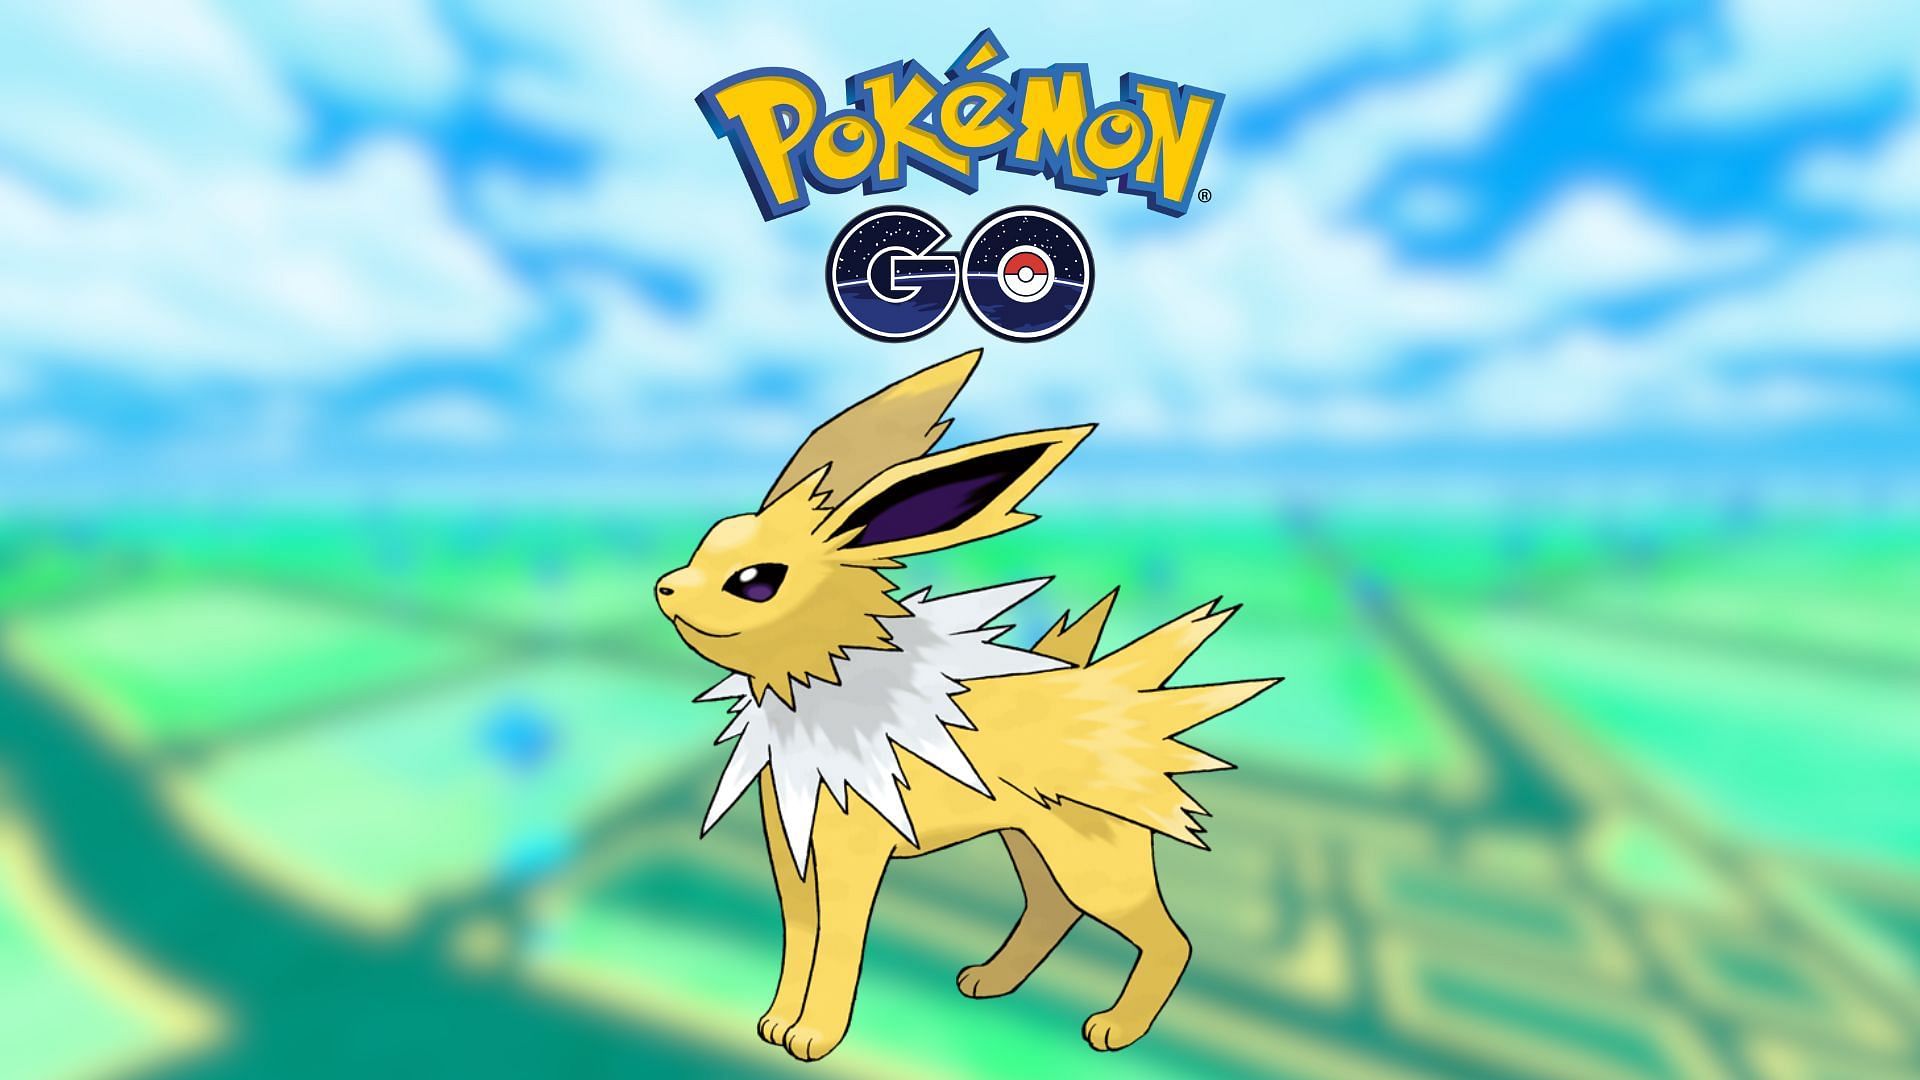 Eevee (Pokémon GO) - Best Movesets, Counters, Evolutions and CP